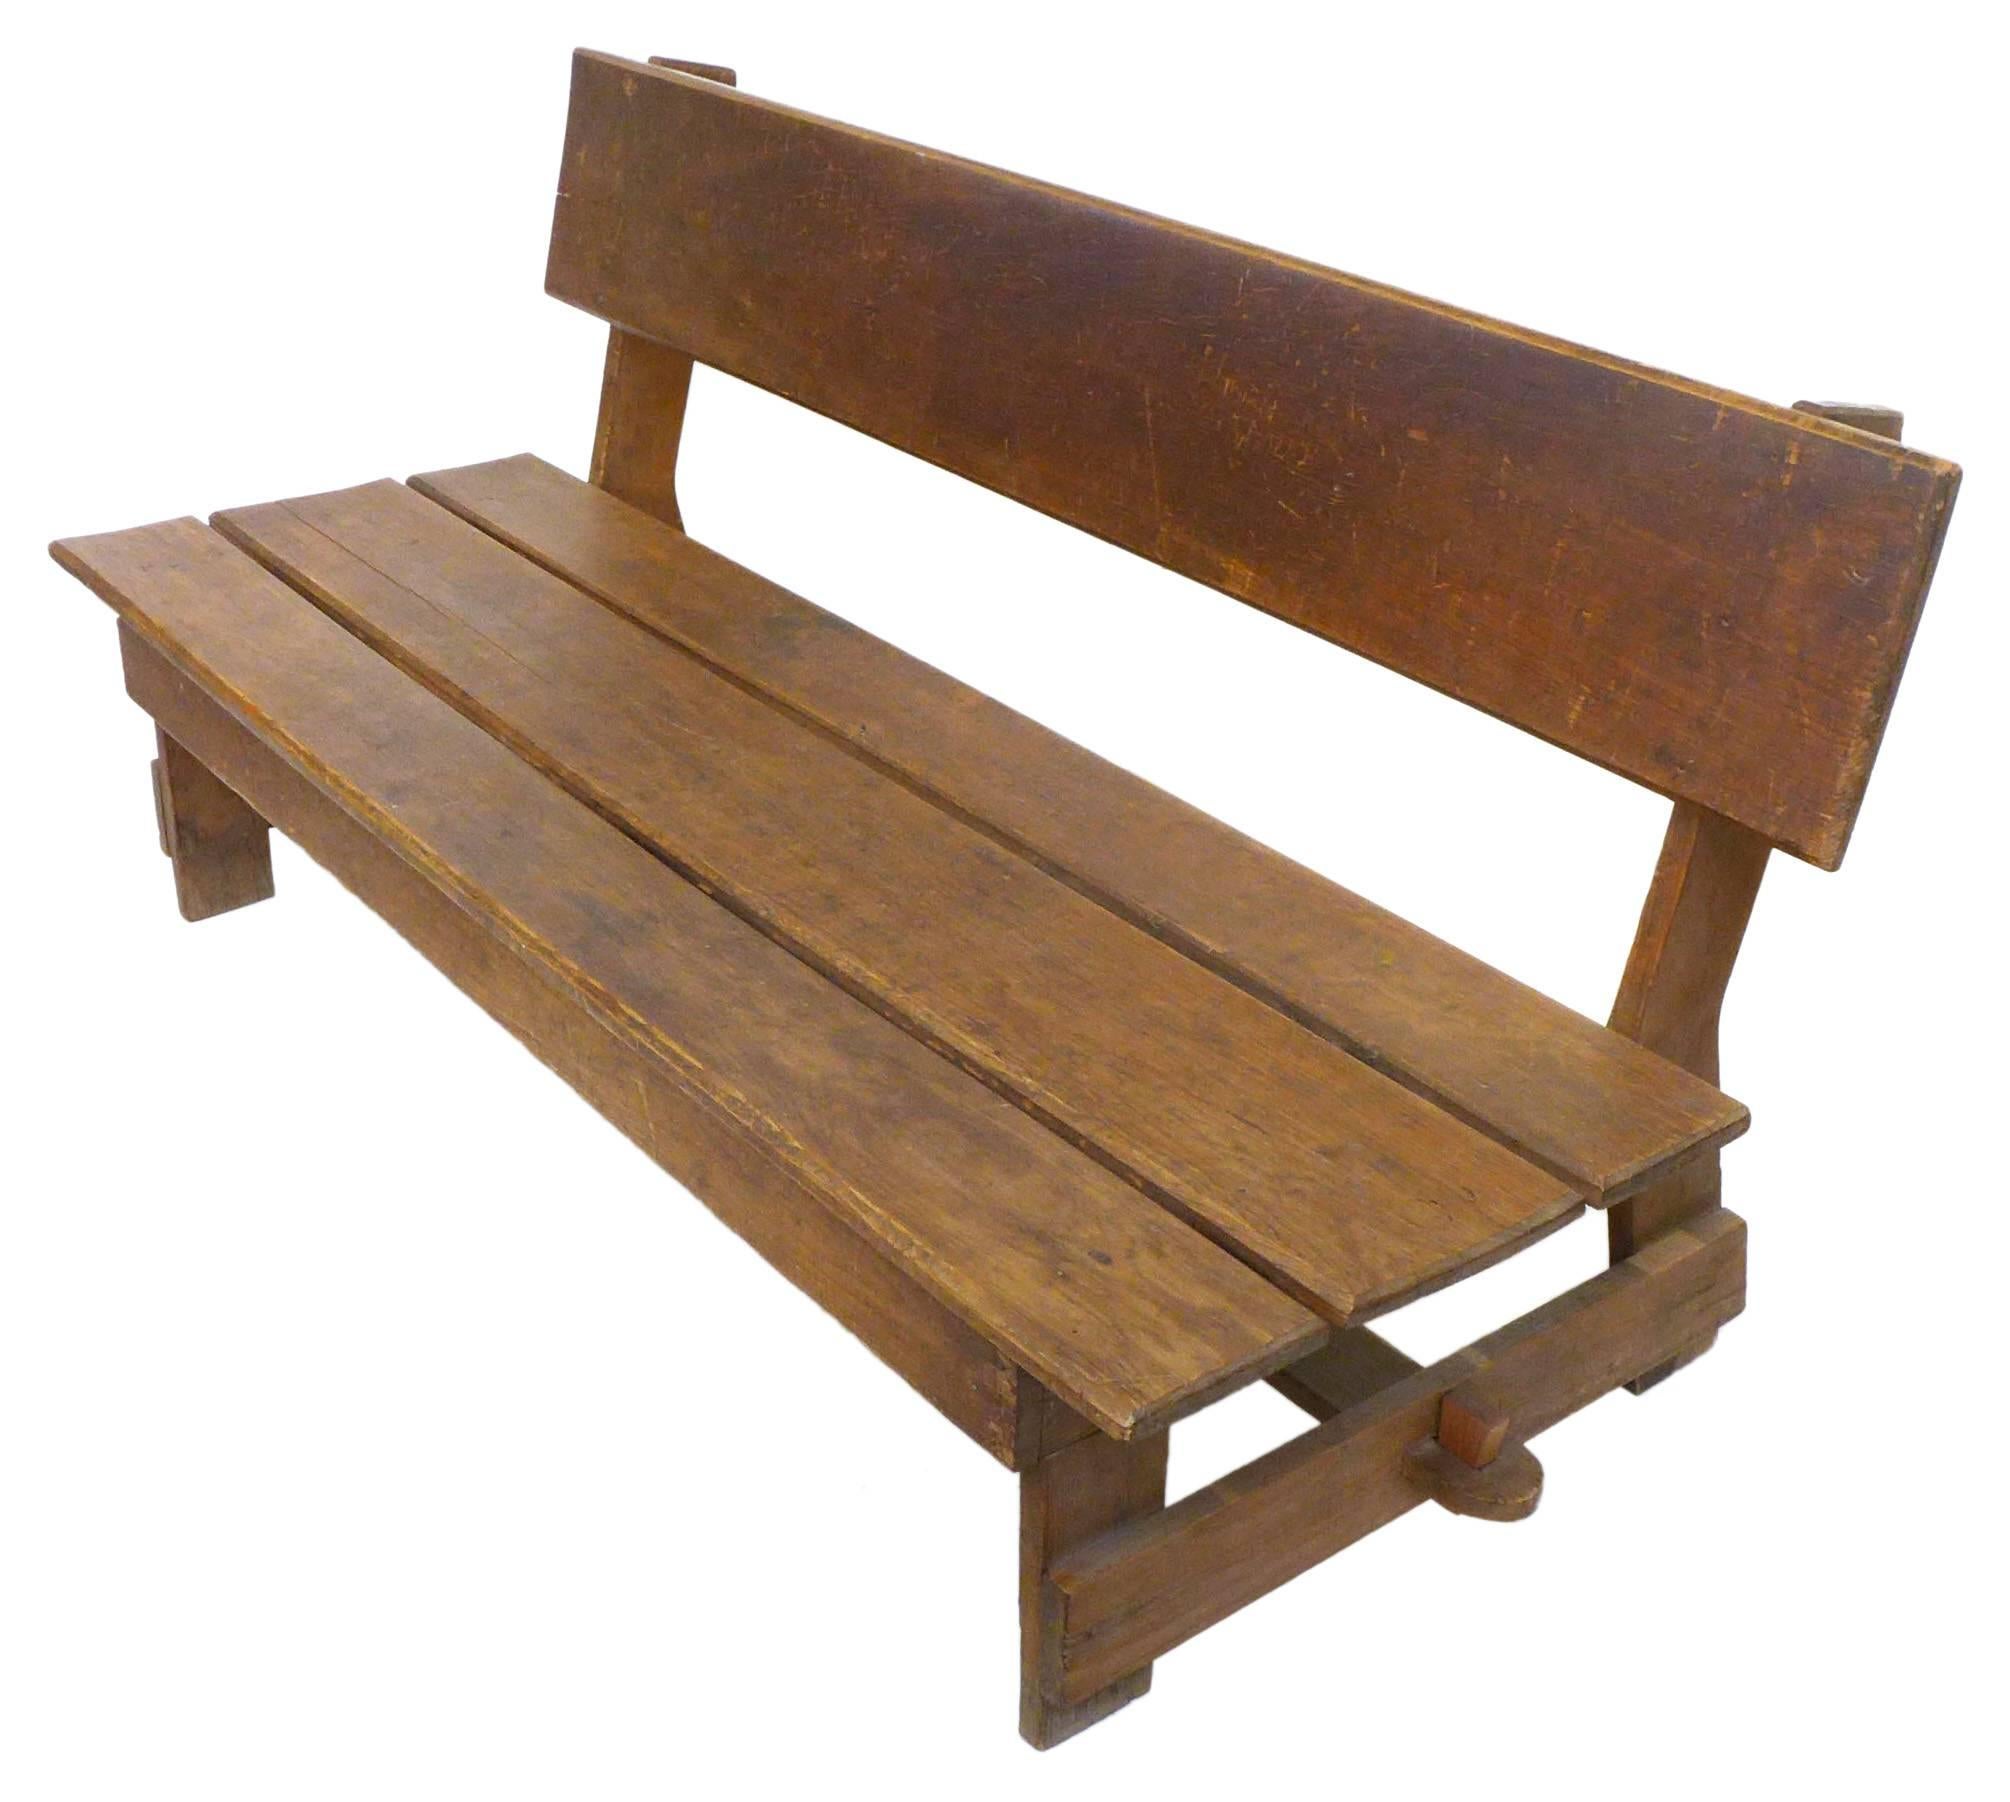 An exceptional American craft wood slat bench. An elegant, perfectly simple, utilitarian construction primarily of plain, cut boards with decorative, through-mortise-and-tenon joint at the cross-stretcher. Great from all angles with wonderful scale